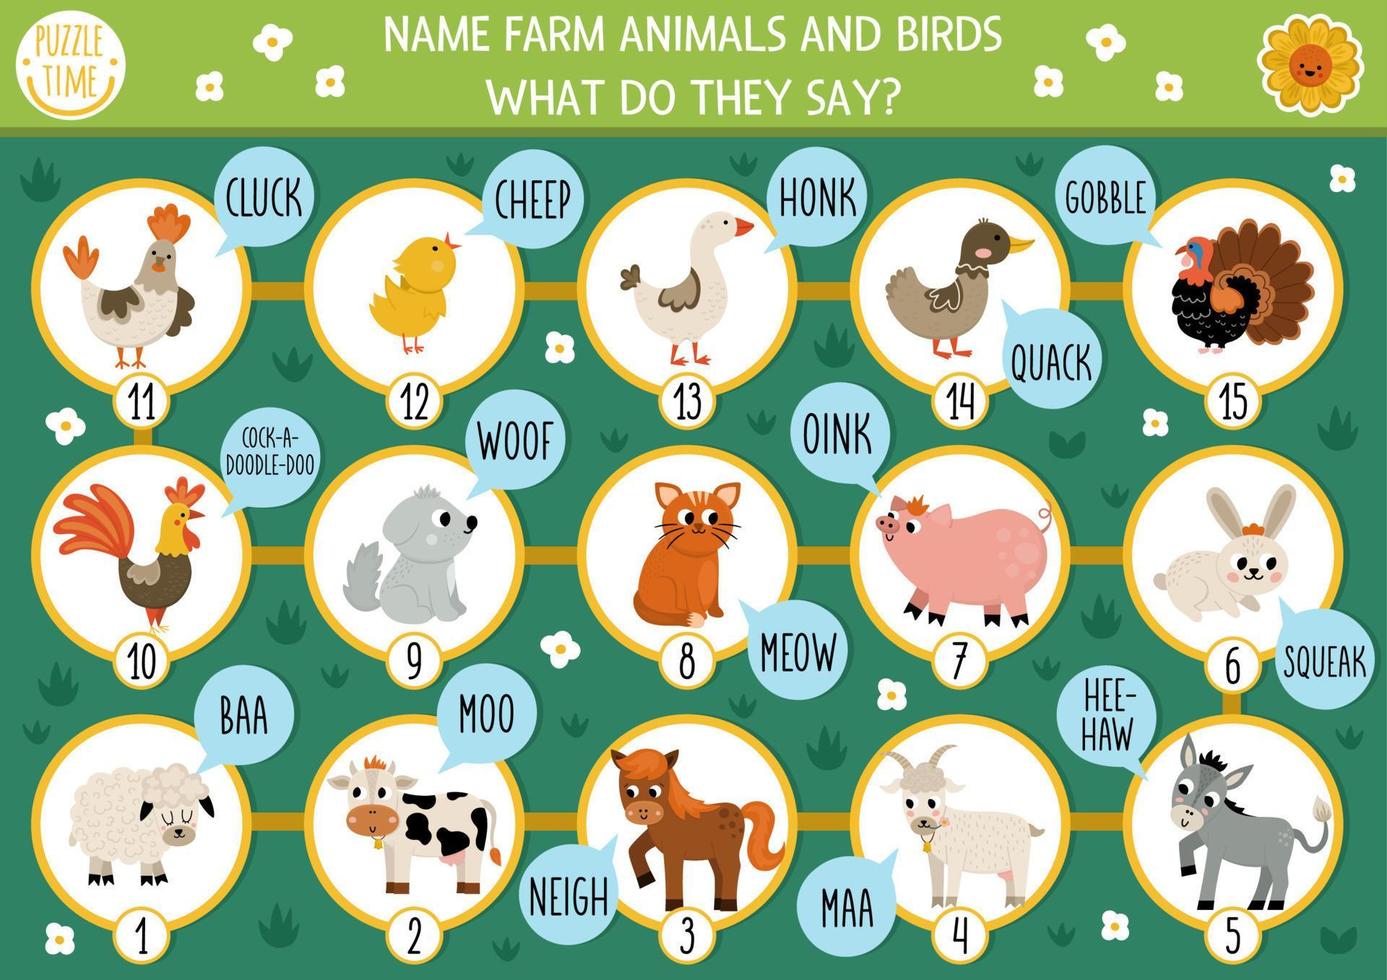 Dice board game for children with farm animals, birds and their sounds. Countryside boardgame.  Rural country activity or printable worksheet for kids. Name the animals, say moo, baa, oink, meow vector